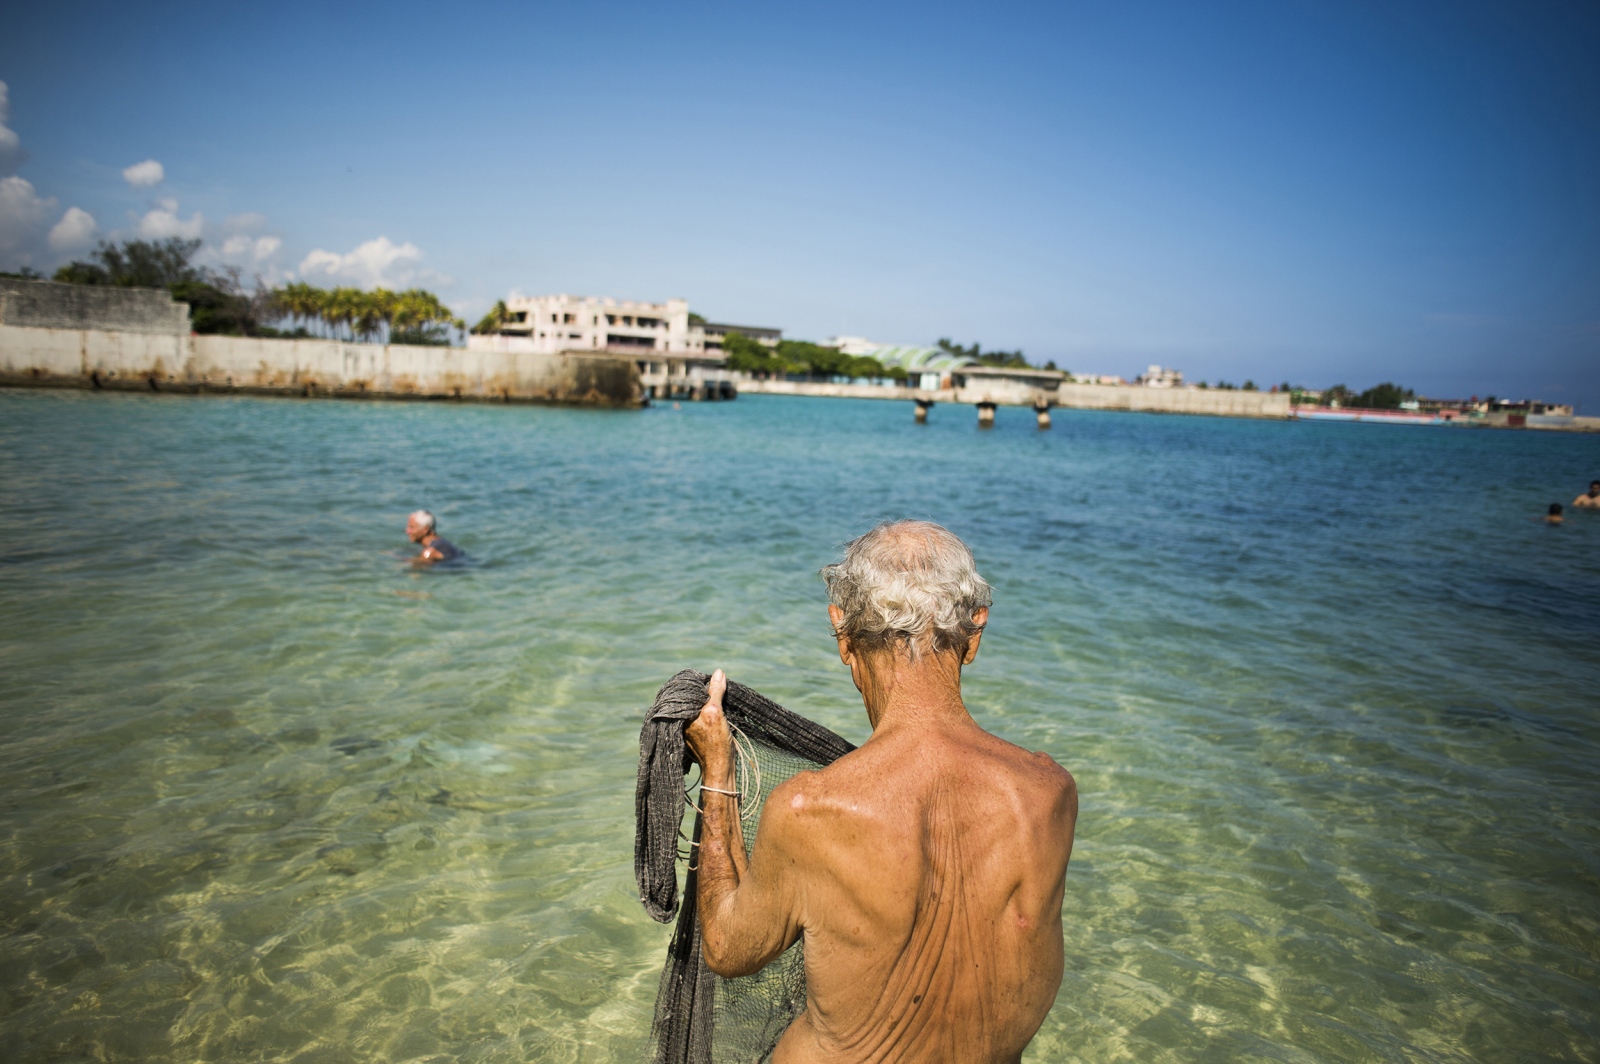 ¡Cuba Libre! - A man fishes with an old, traditional fishing net behind...